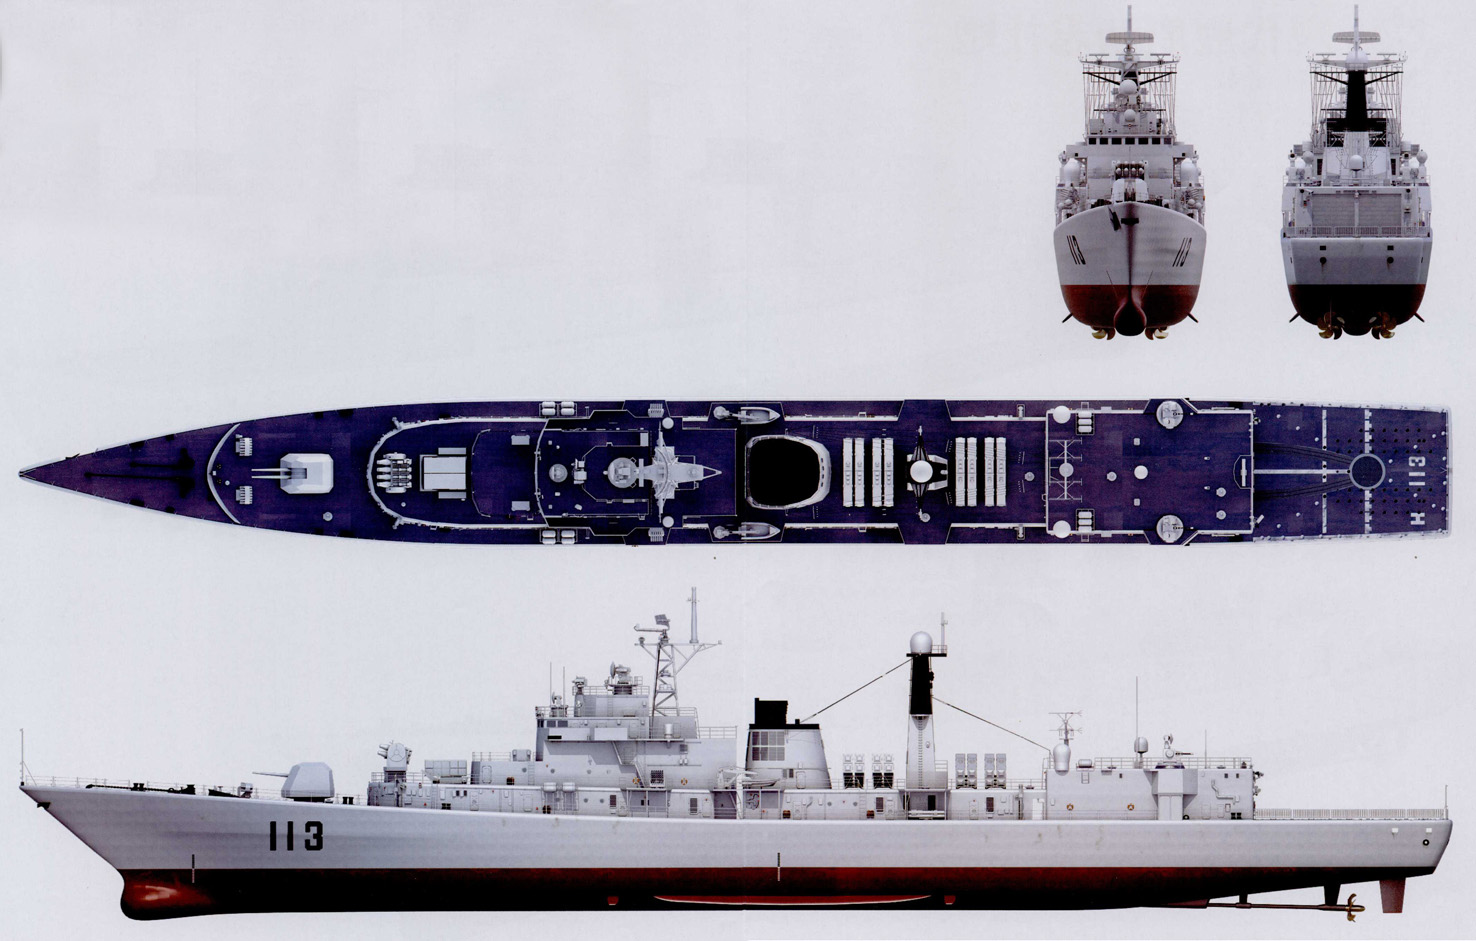 112+Harbin+113+Qingdao+Type+052+Luhu-class+guided+missile+destroyers+people%2527s+Liberation+Army+Navy+%2528PLAN%2529+YJ-83+%2528C-803%2529+anti-ship+missiles+HQ-7+SAM+%2528Type+730%2529+7-barrel+30+mm+CIWS+%25283%2529.jpg